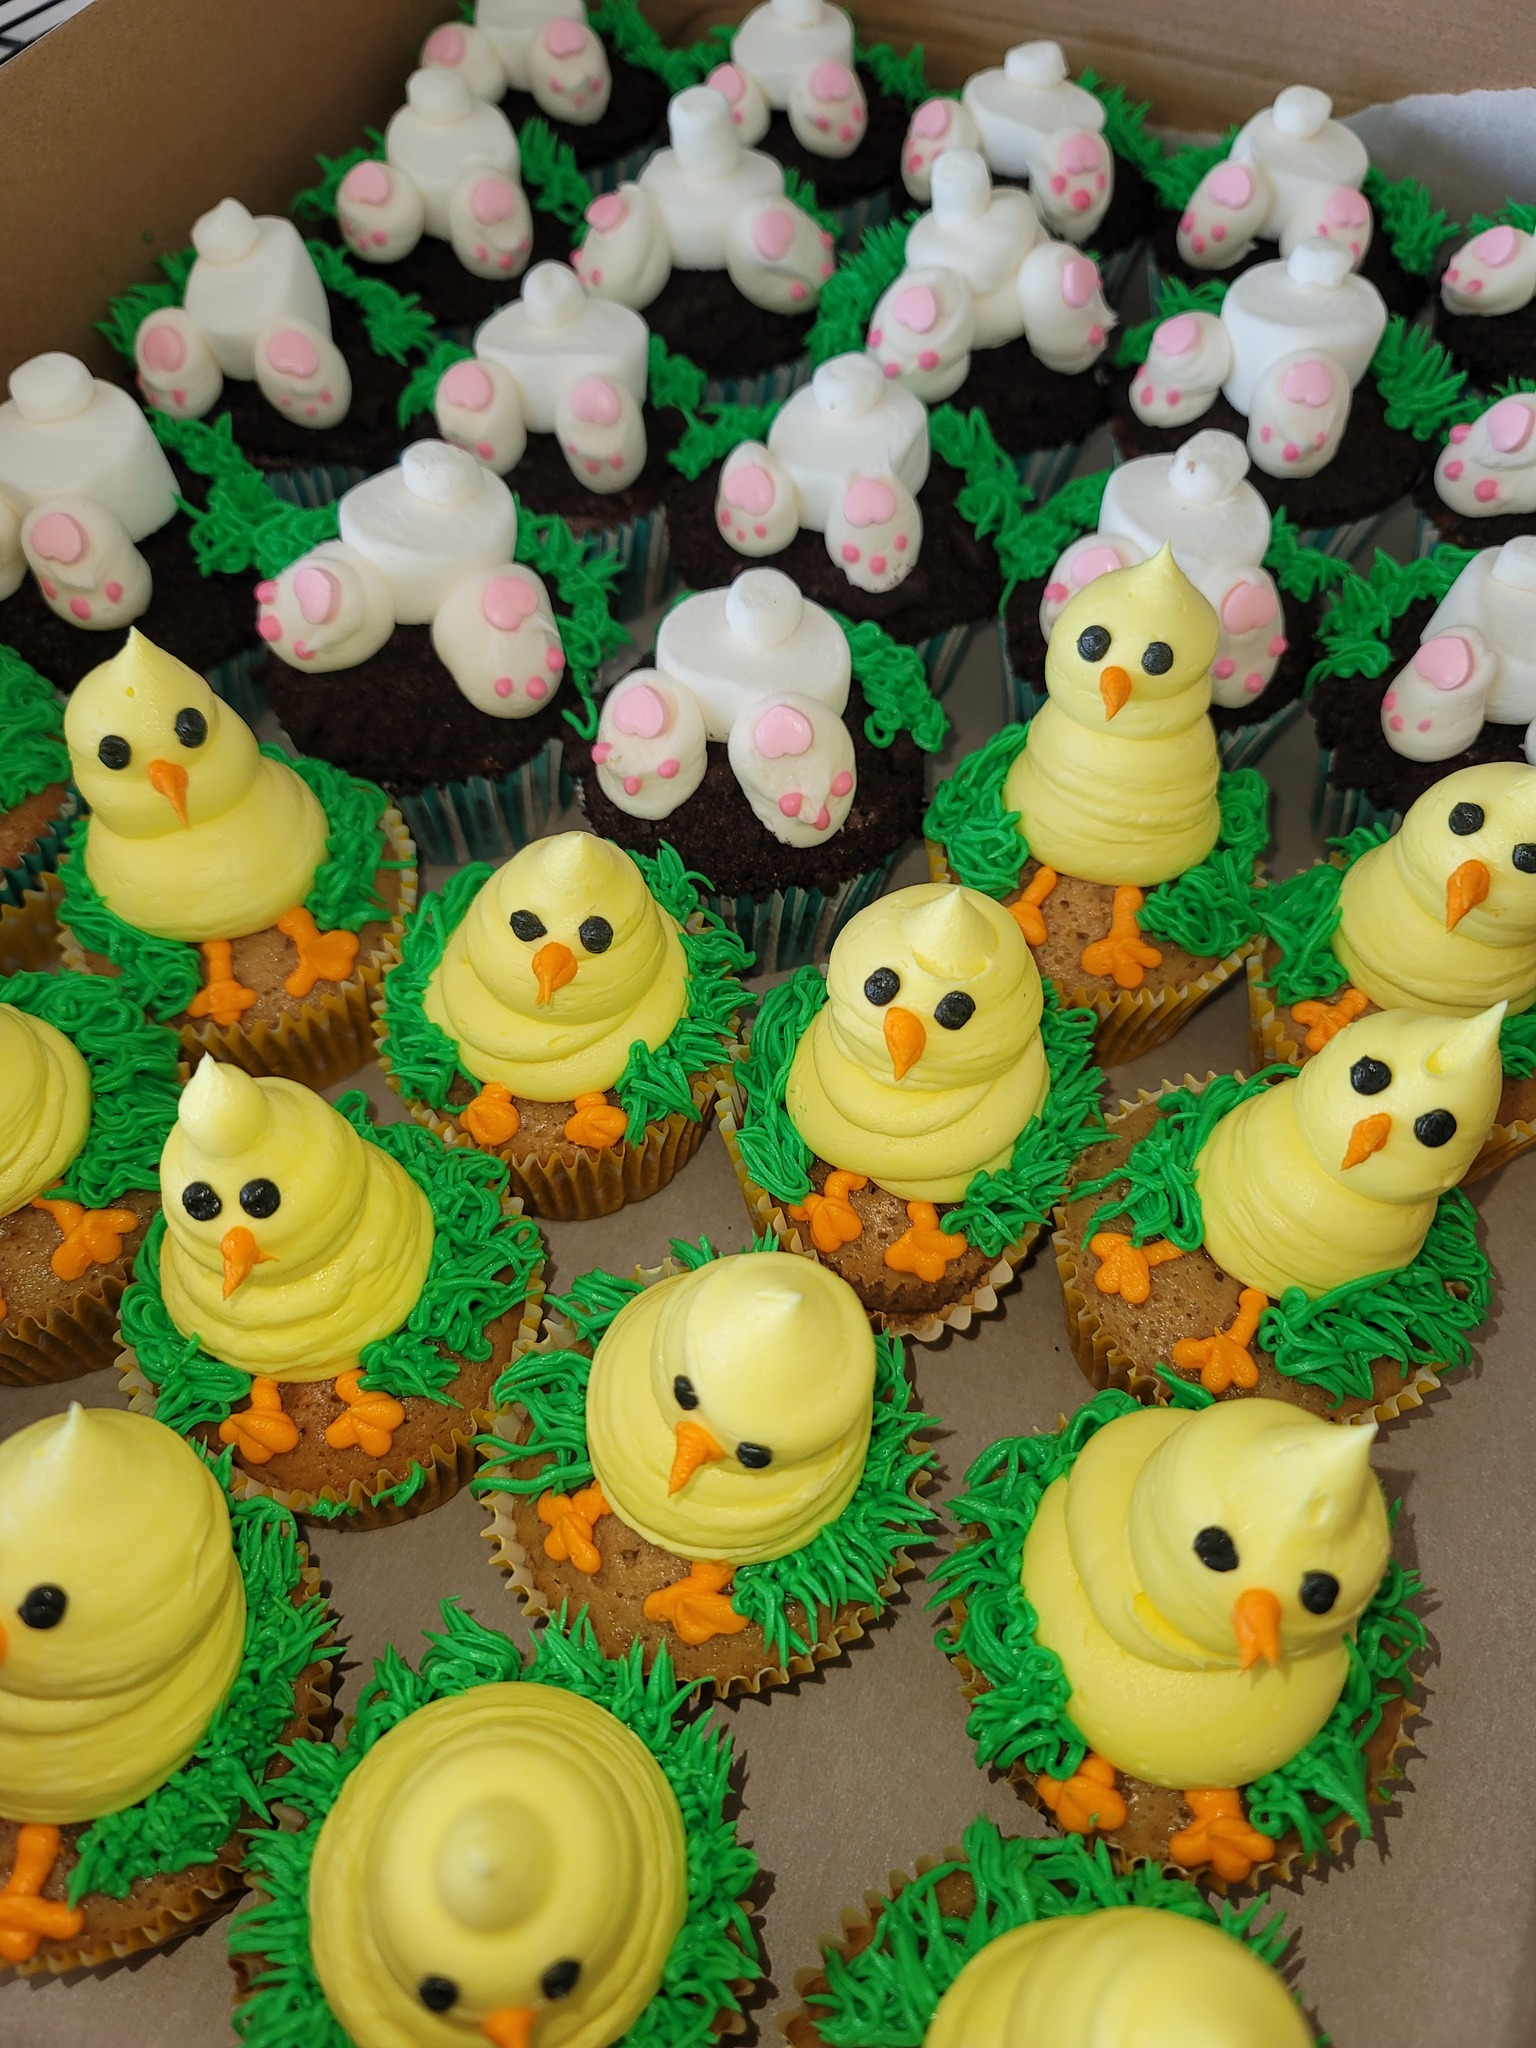 Easter cupcakes made by Nan's Nummies